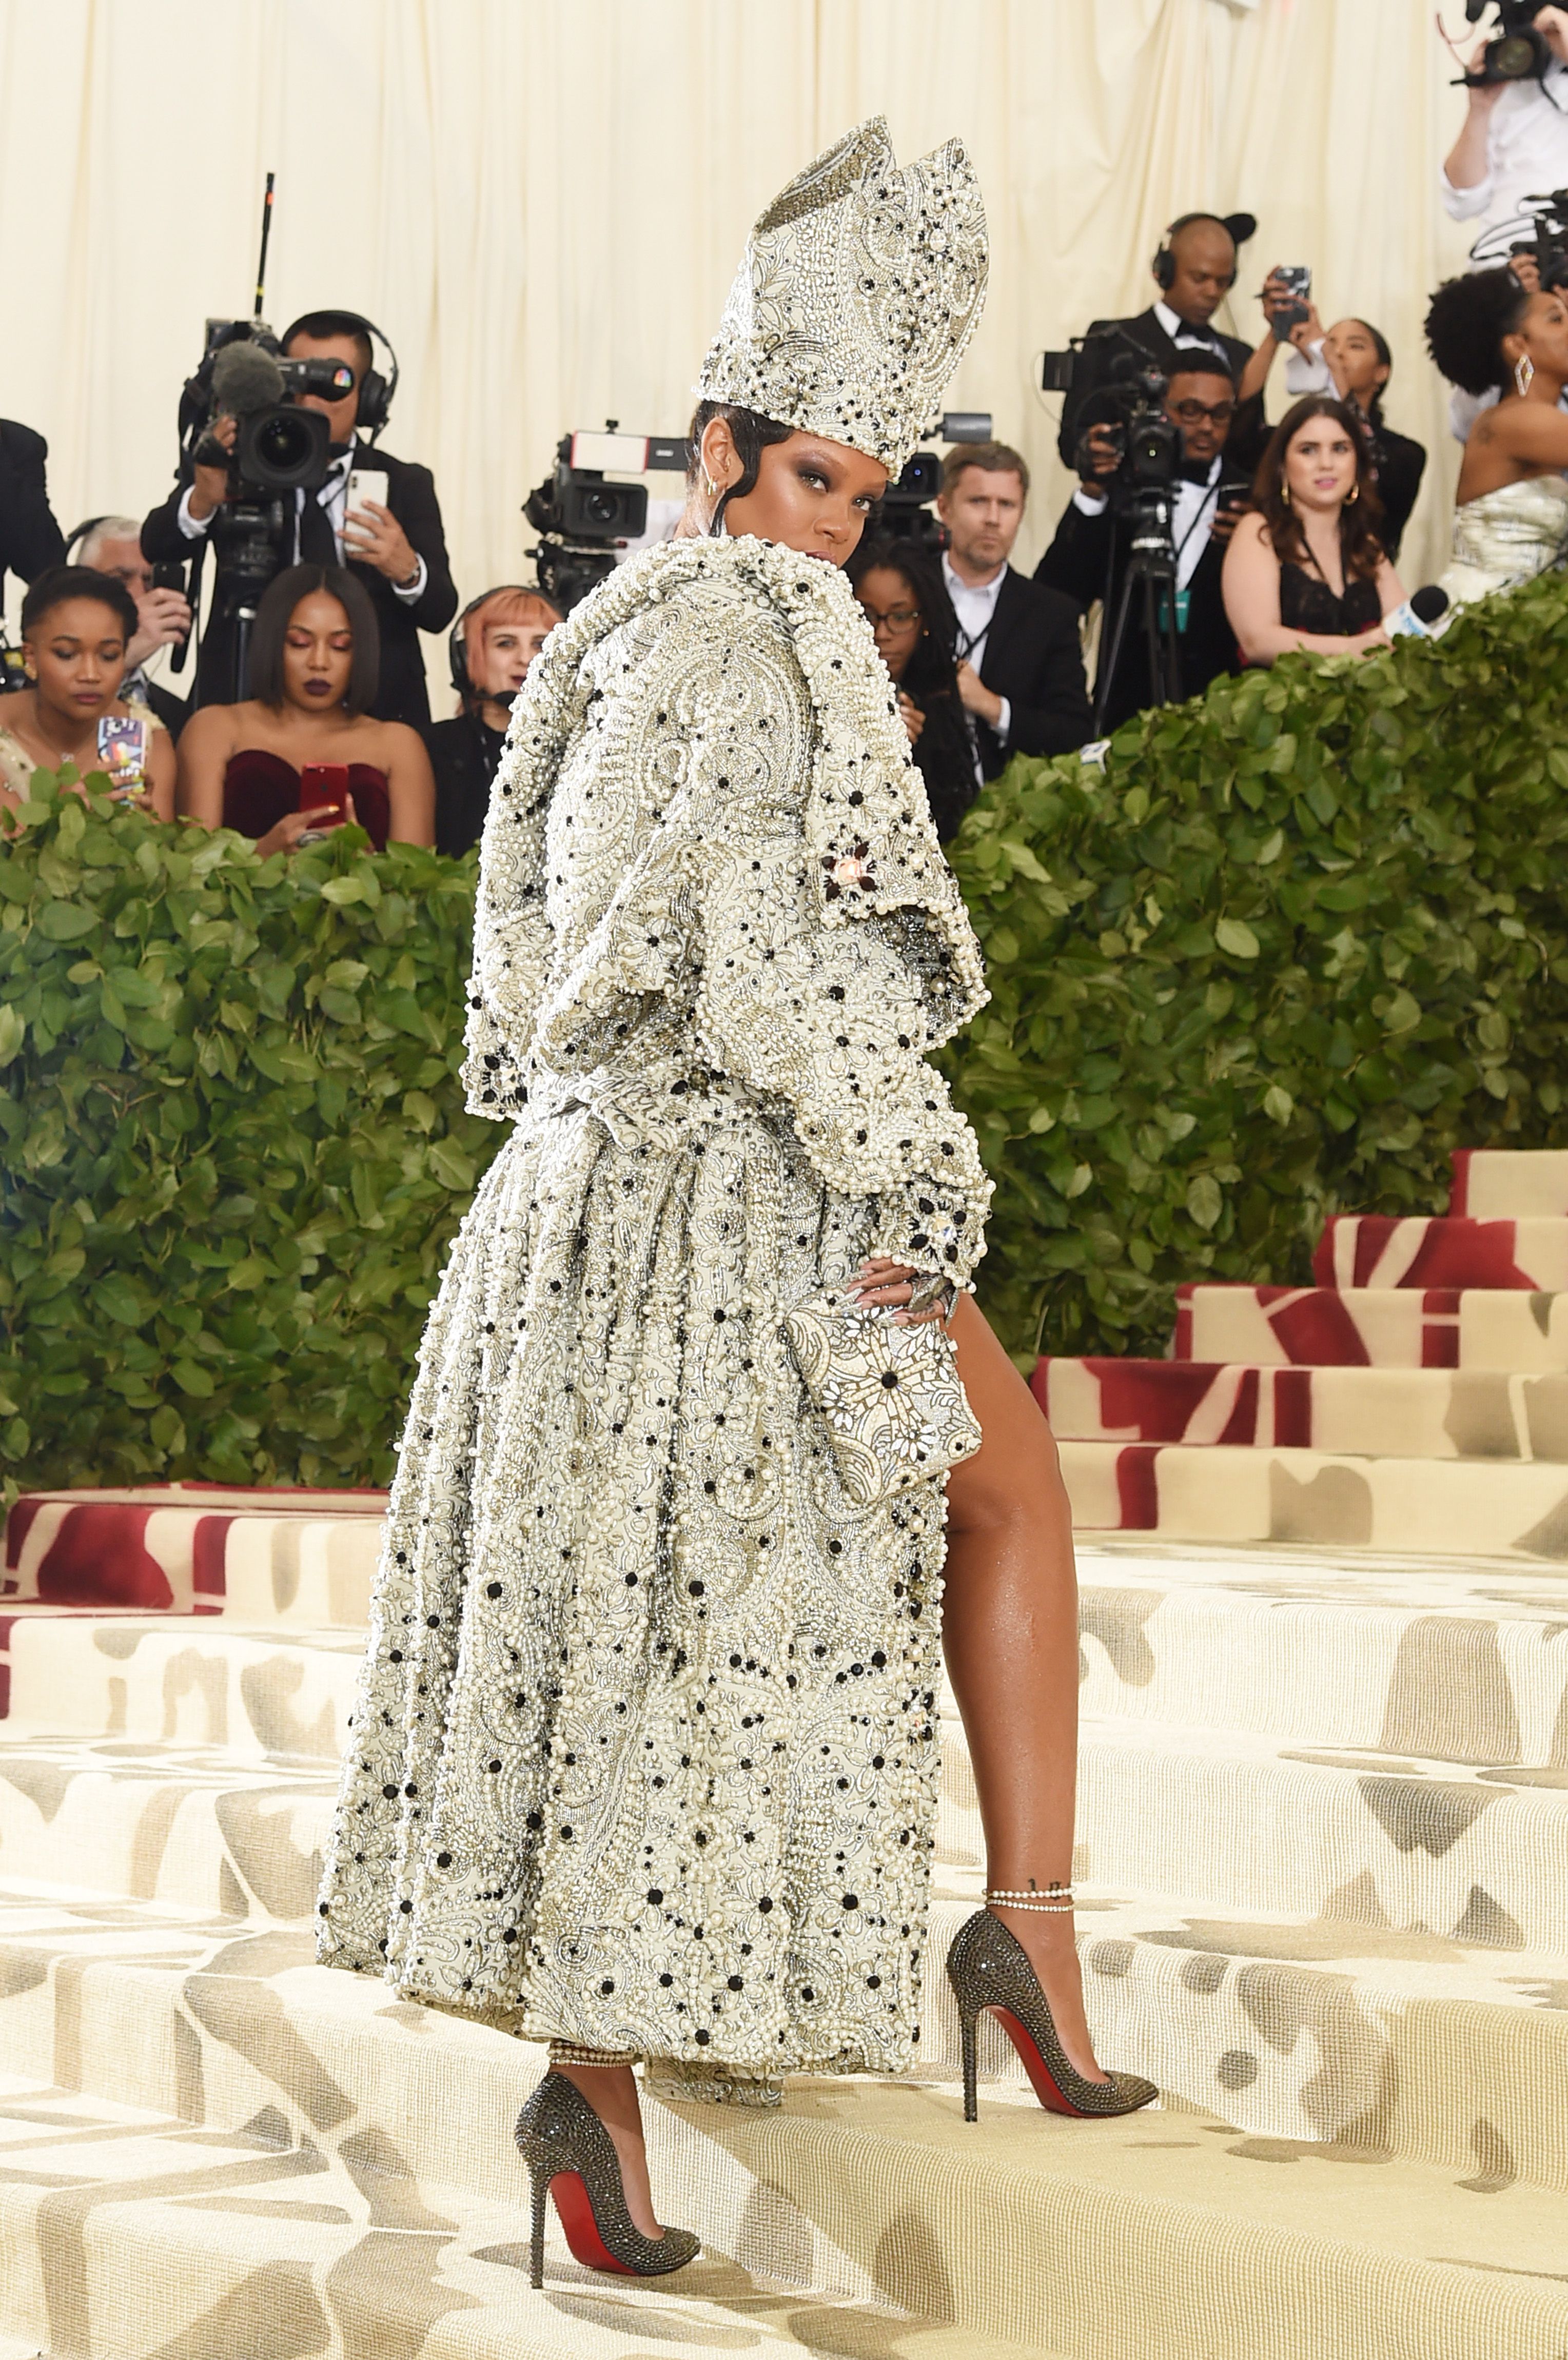 How To Watch The 2019 Met Gala Red Carpet